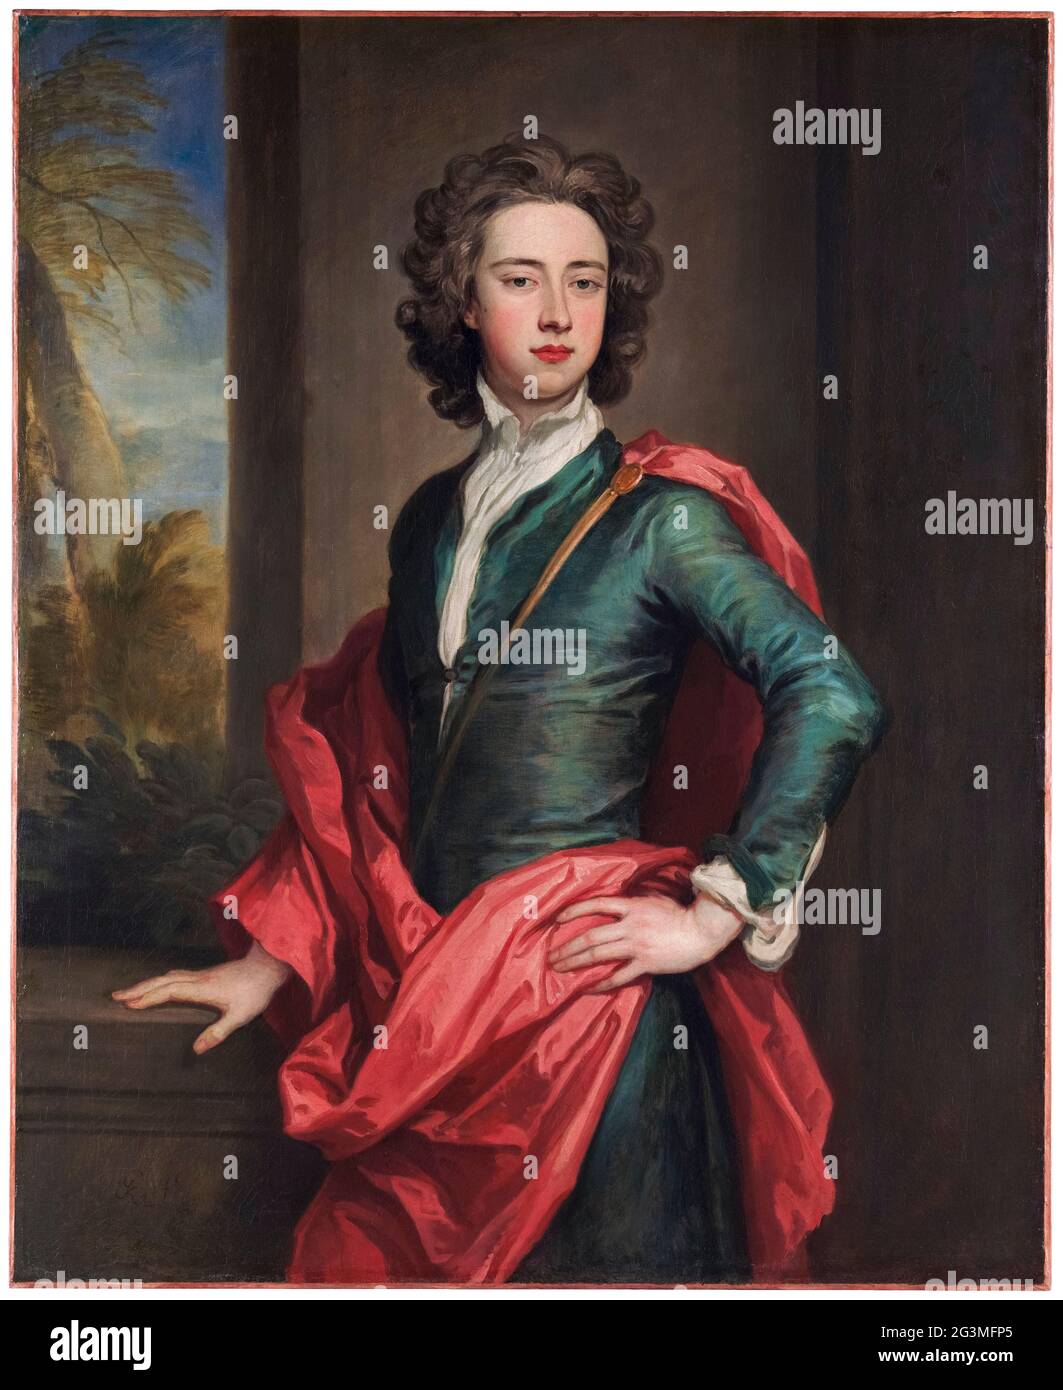 Charles Beauclerk (1670-1726) 1st Duke of St Albans, an illegitimate son of King Charles II of England by his mistress Nell Gwyn, portrait painting by Sir Godfrey Kneller, 1690-1695 Stock Photo